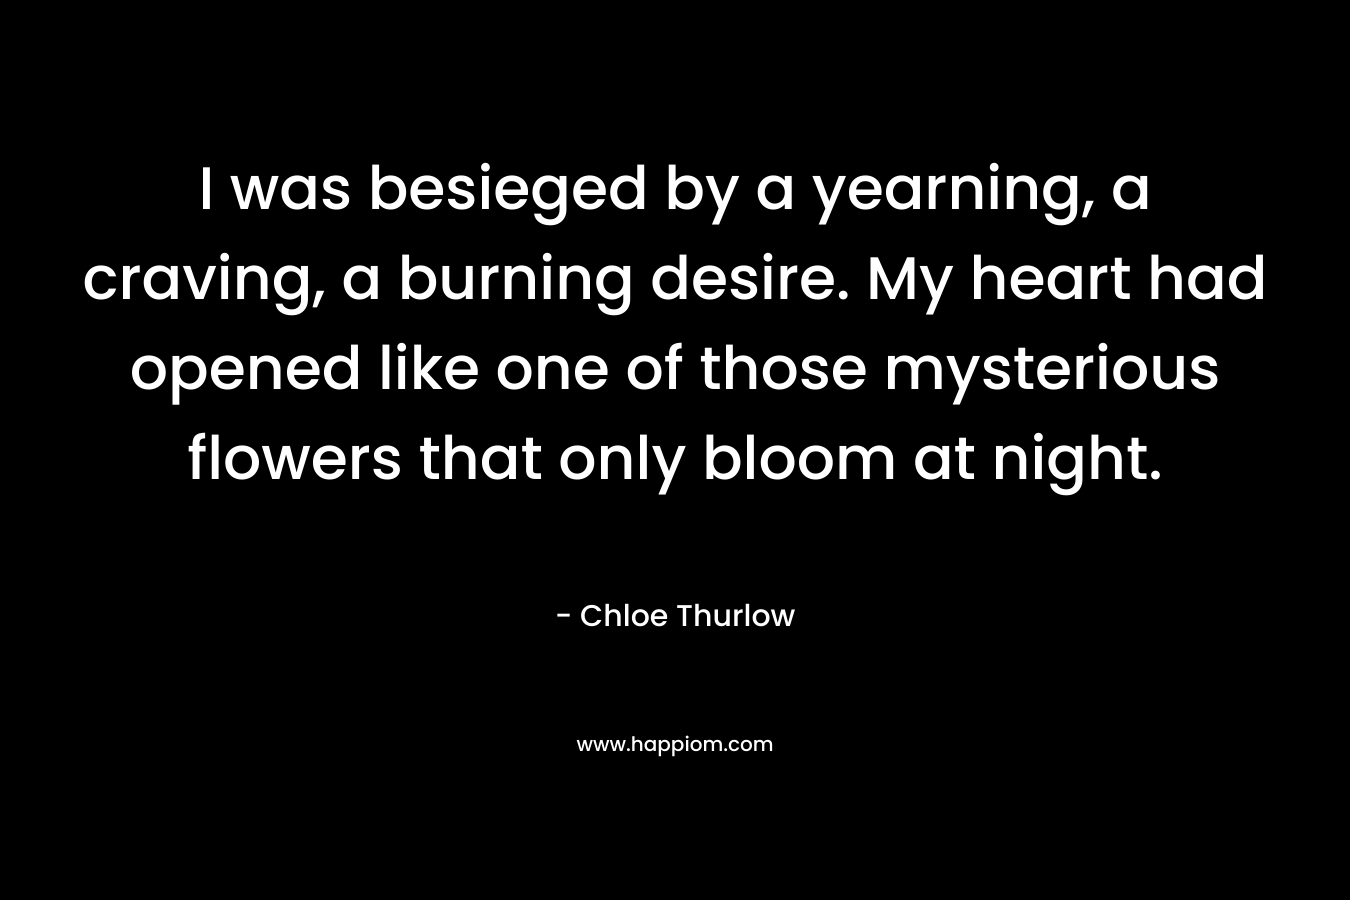 I was besieged by a yearning, a craving, a burning desire. My heart had opened like one of those mysterious flowers that only bloom at night. – Chloe Thurlow